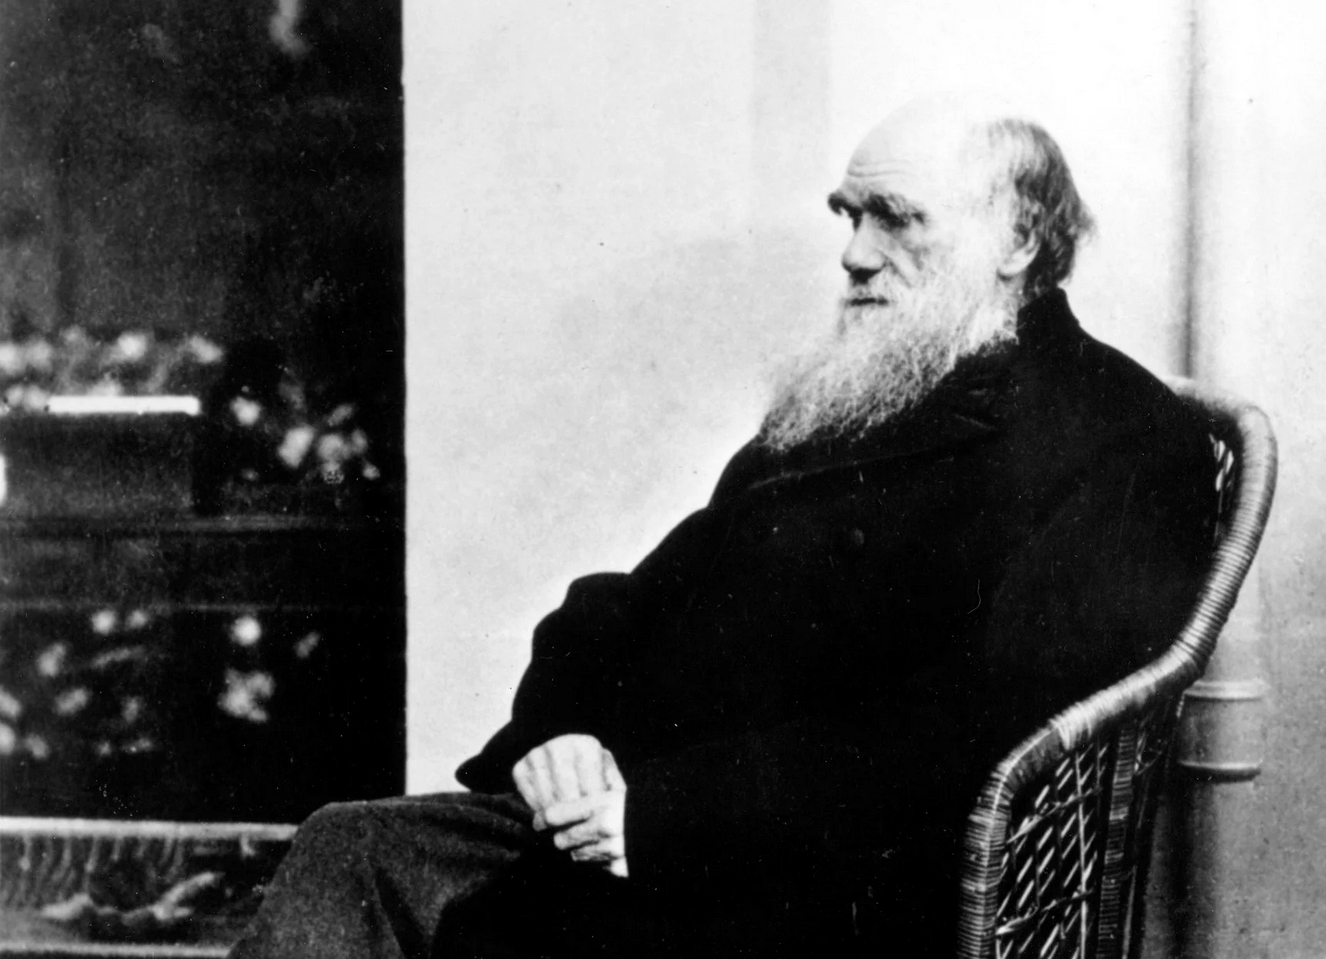 What Darwin Didn’t Know: The Modern Science of Evolution